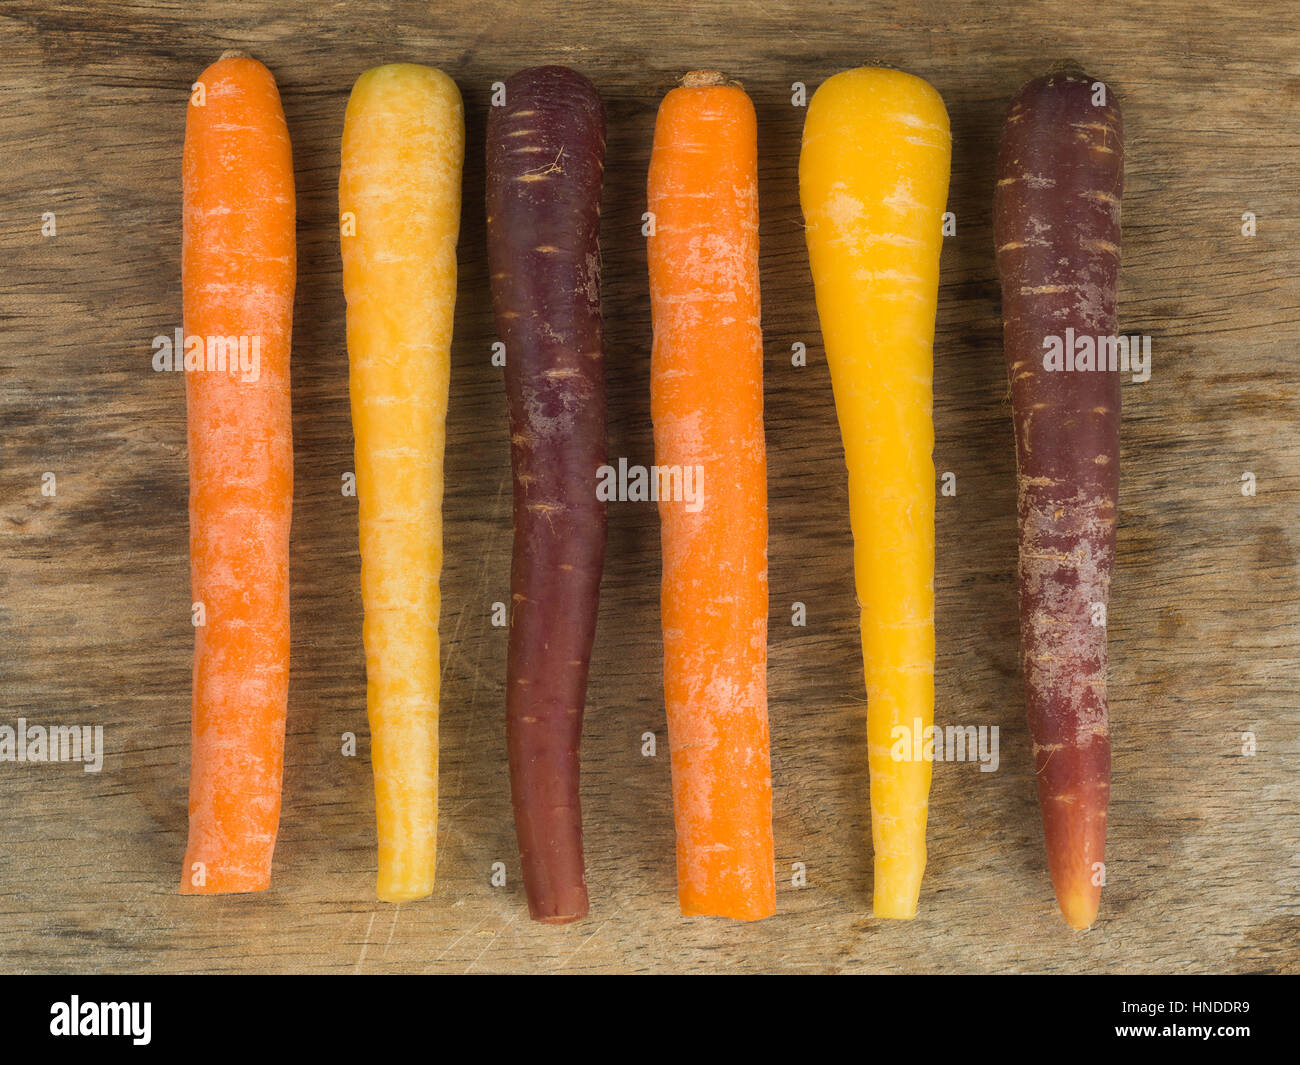 Colorful Rainbow Carrots Cooking Ingredients On A Natural Wood Background Stock Photo